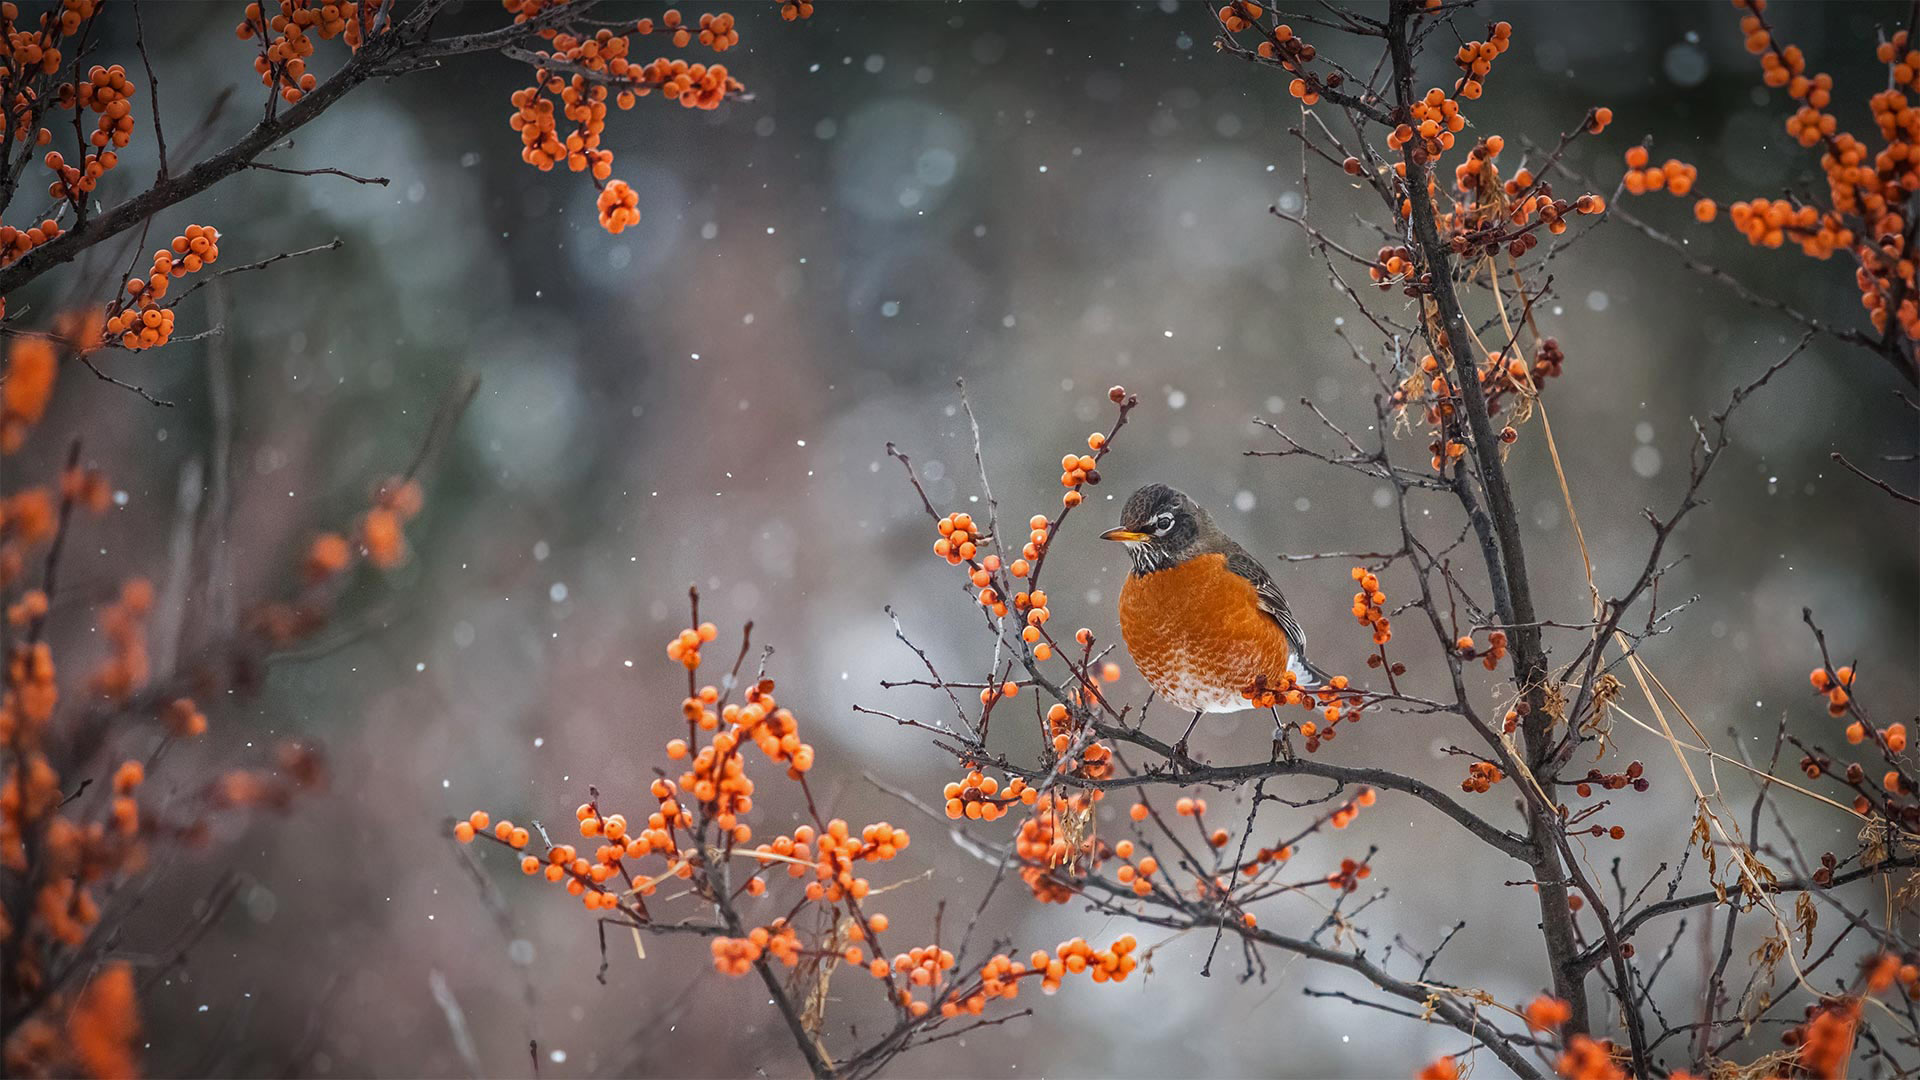 American robin perched on a branch in Canada - marcophotos/Getty Images)